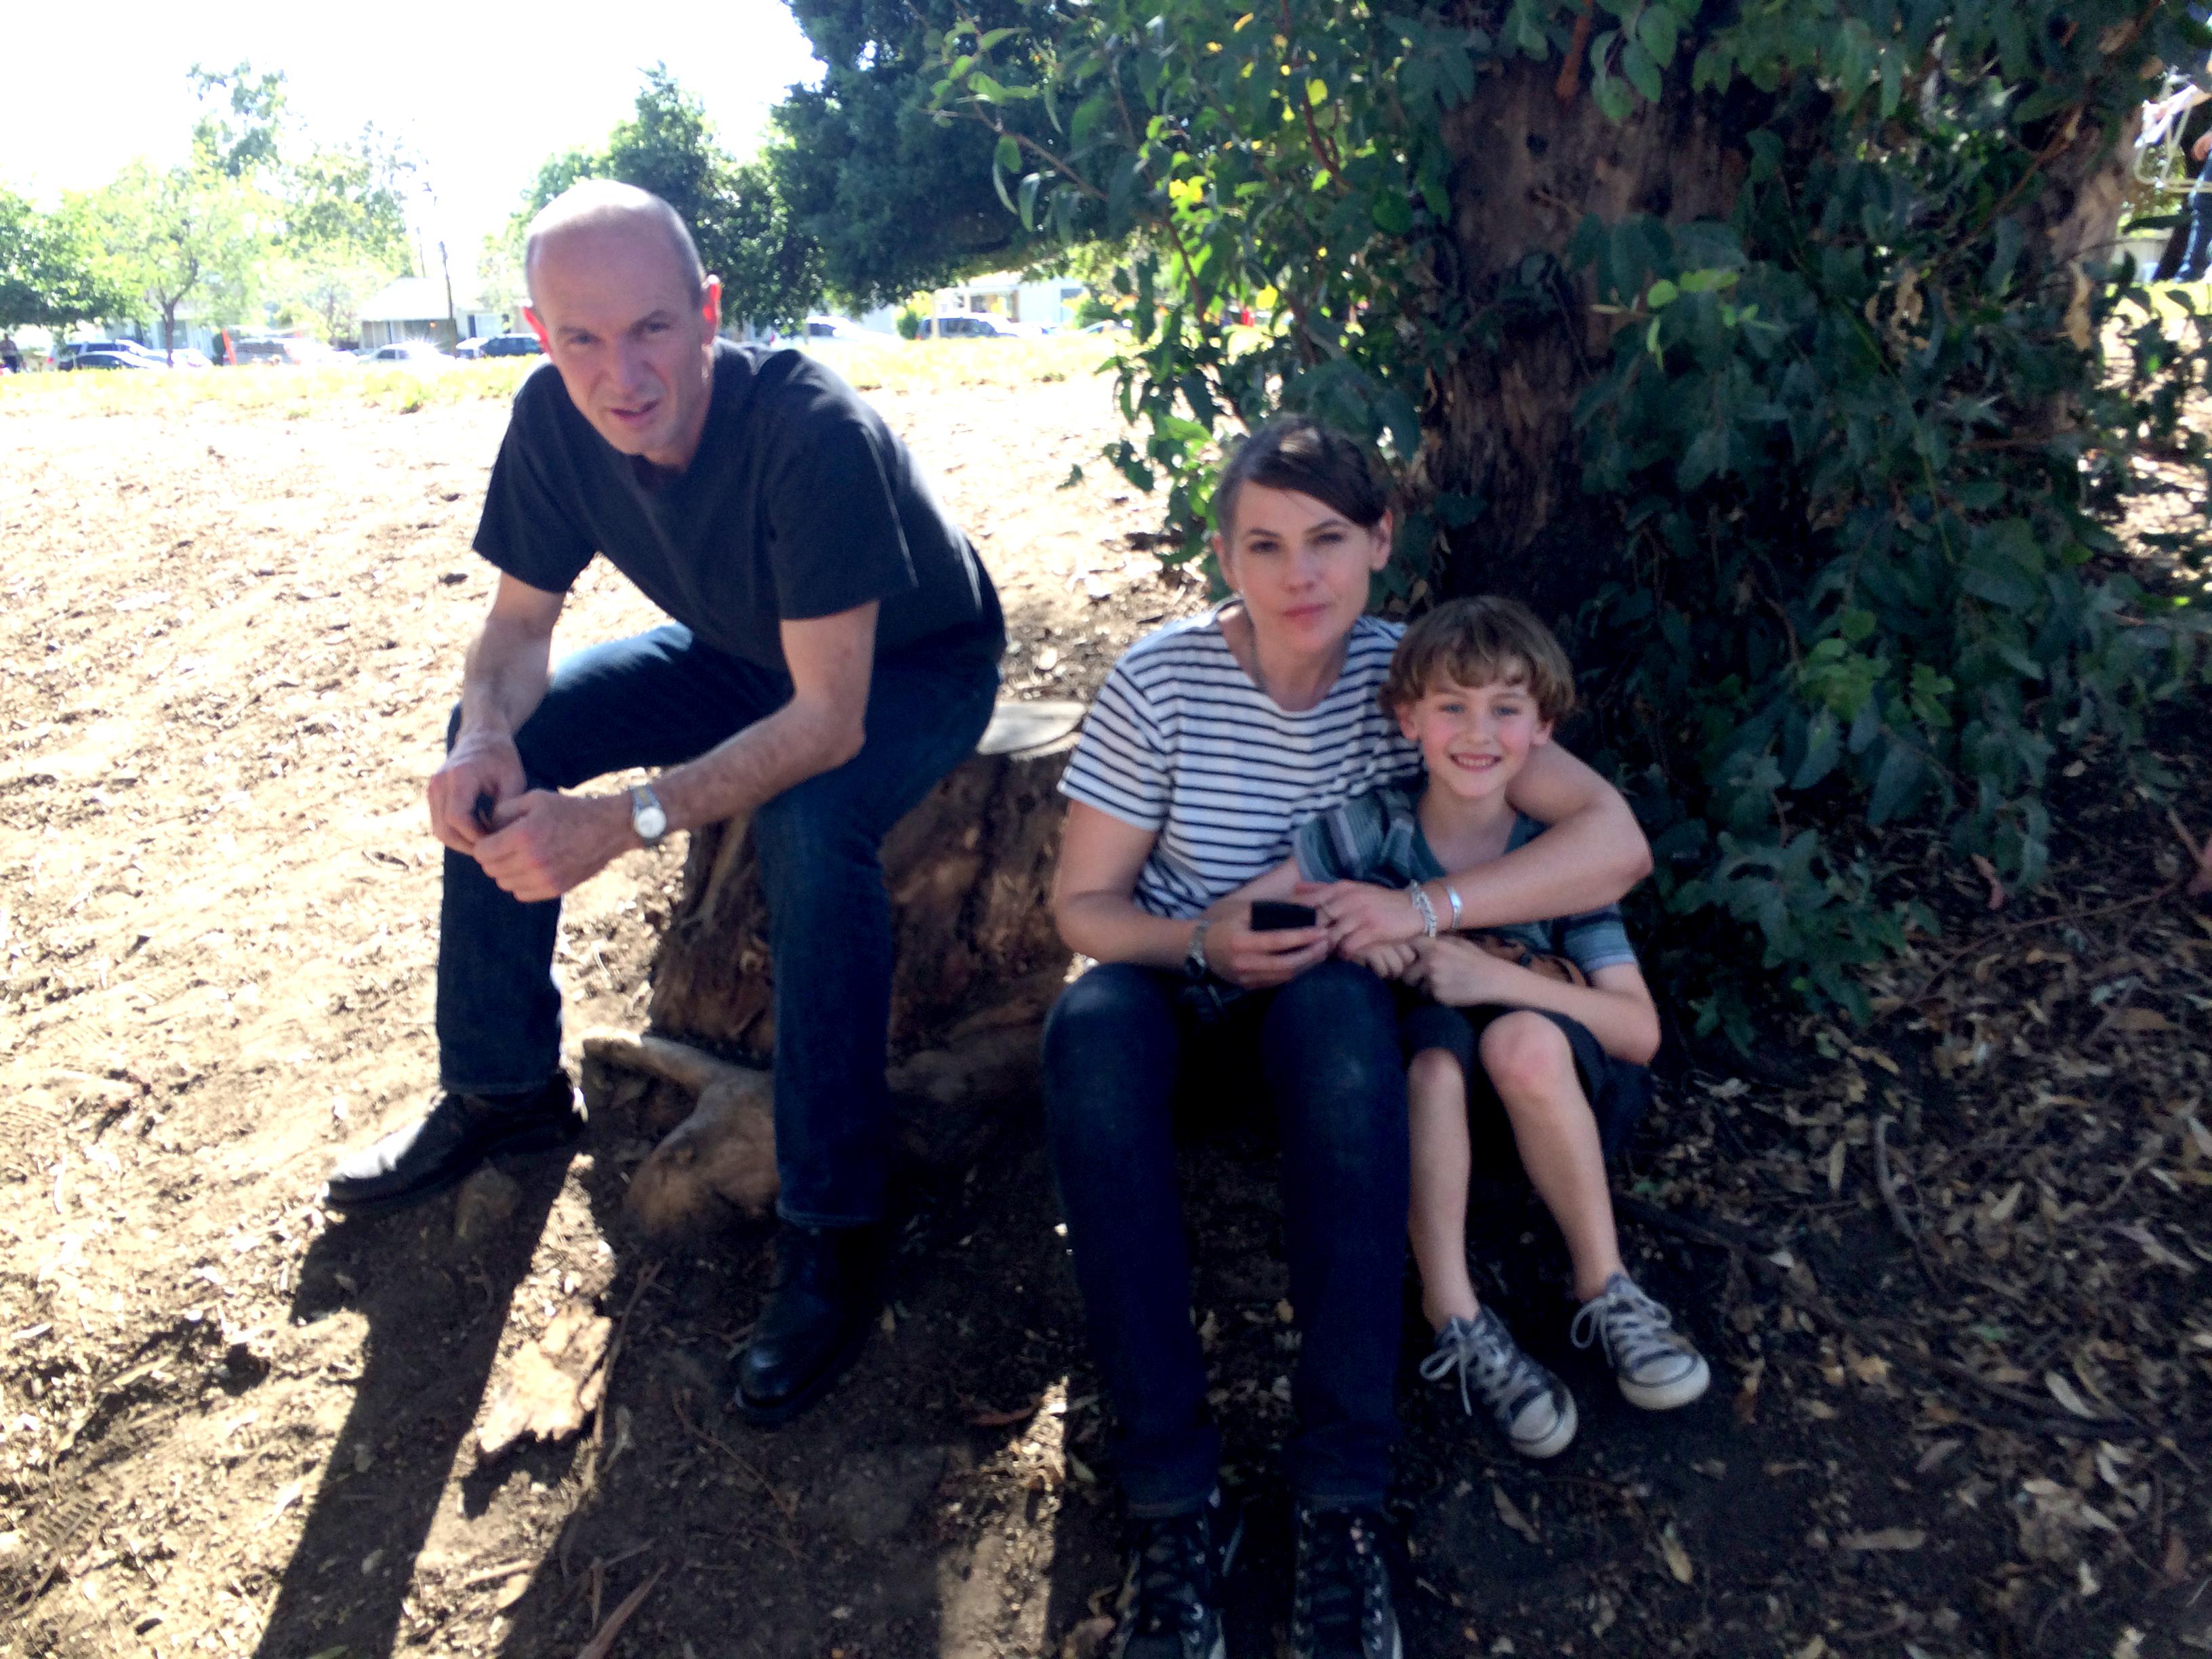 Heaven's Floor, with Clea DuVall and Toby Huss